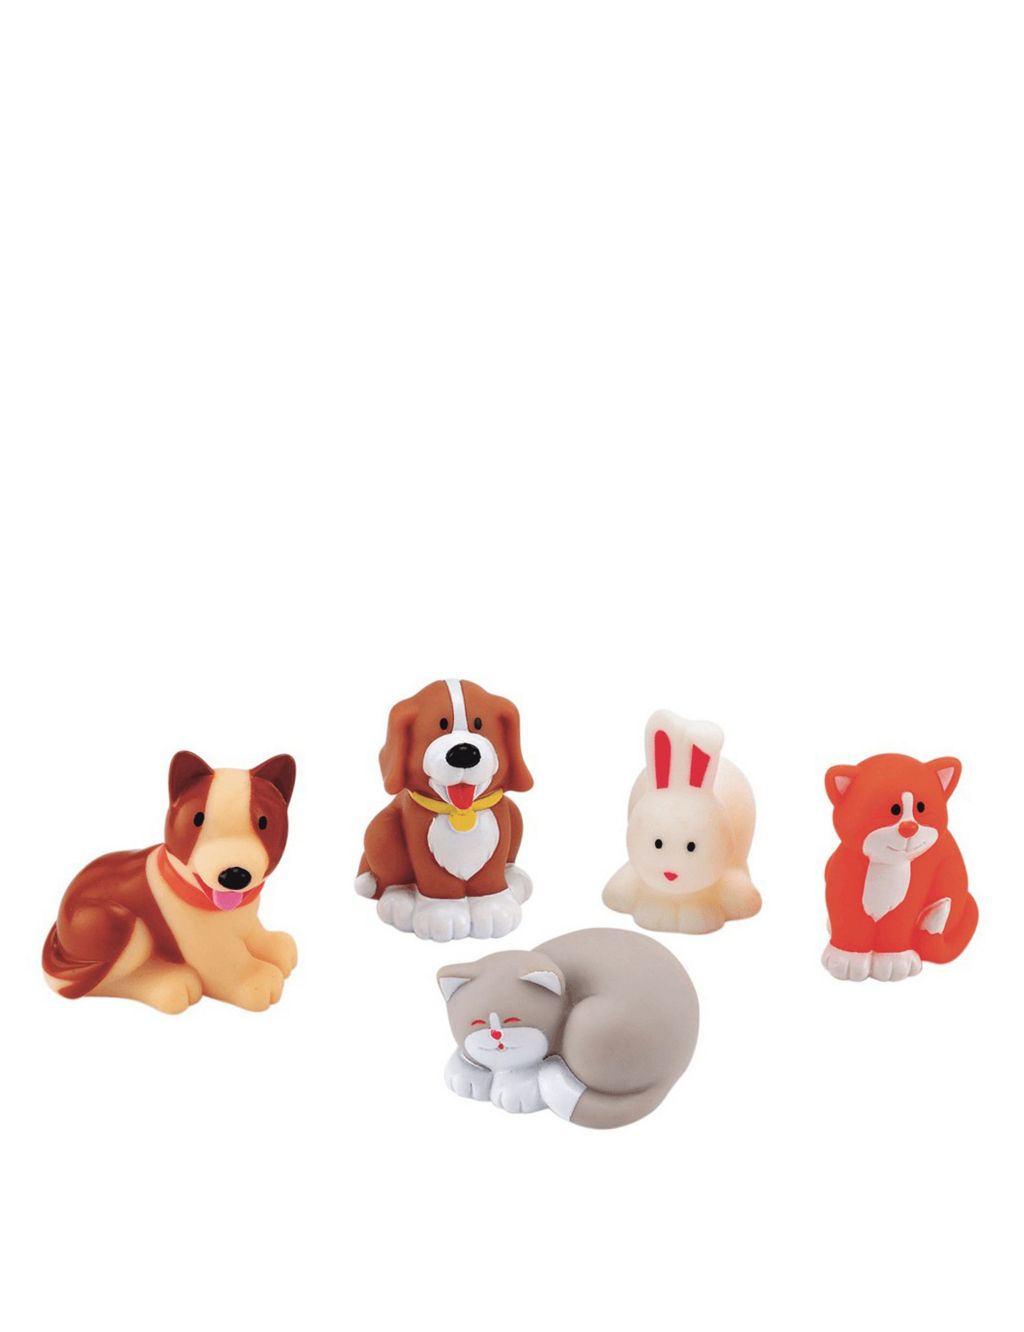 My Happy Pets Pet Collection